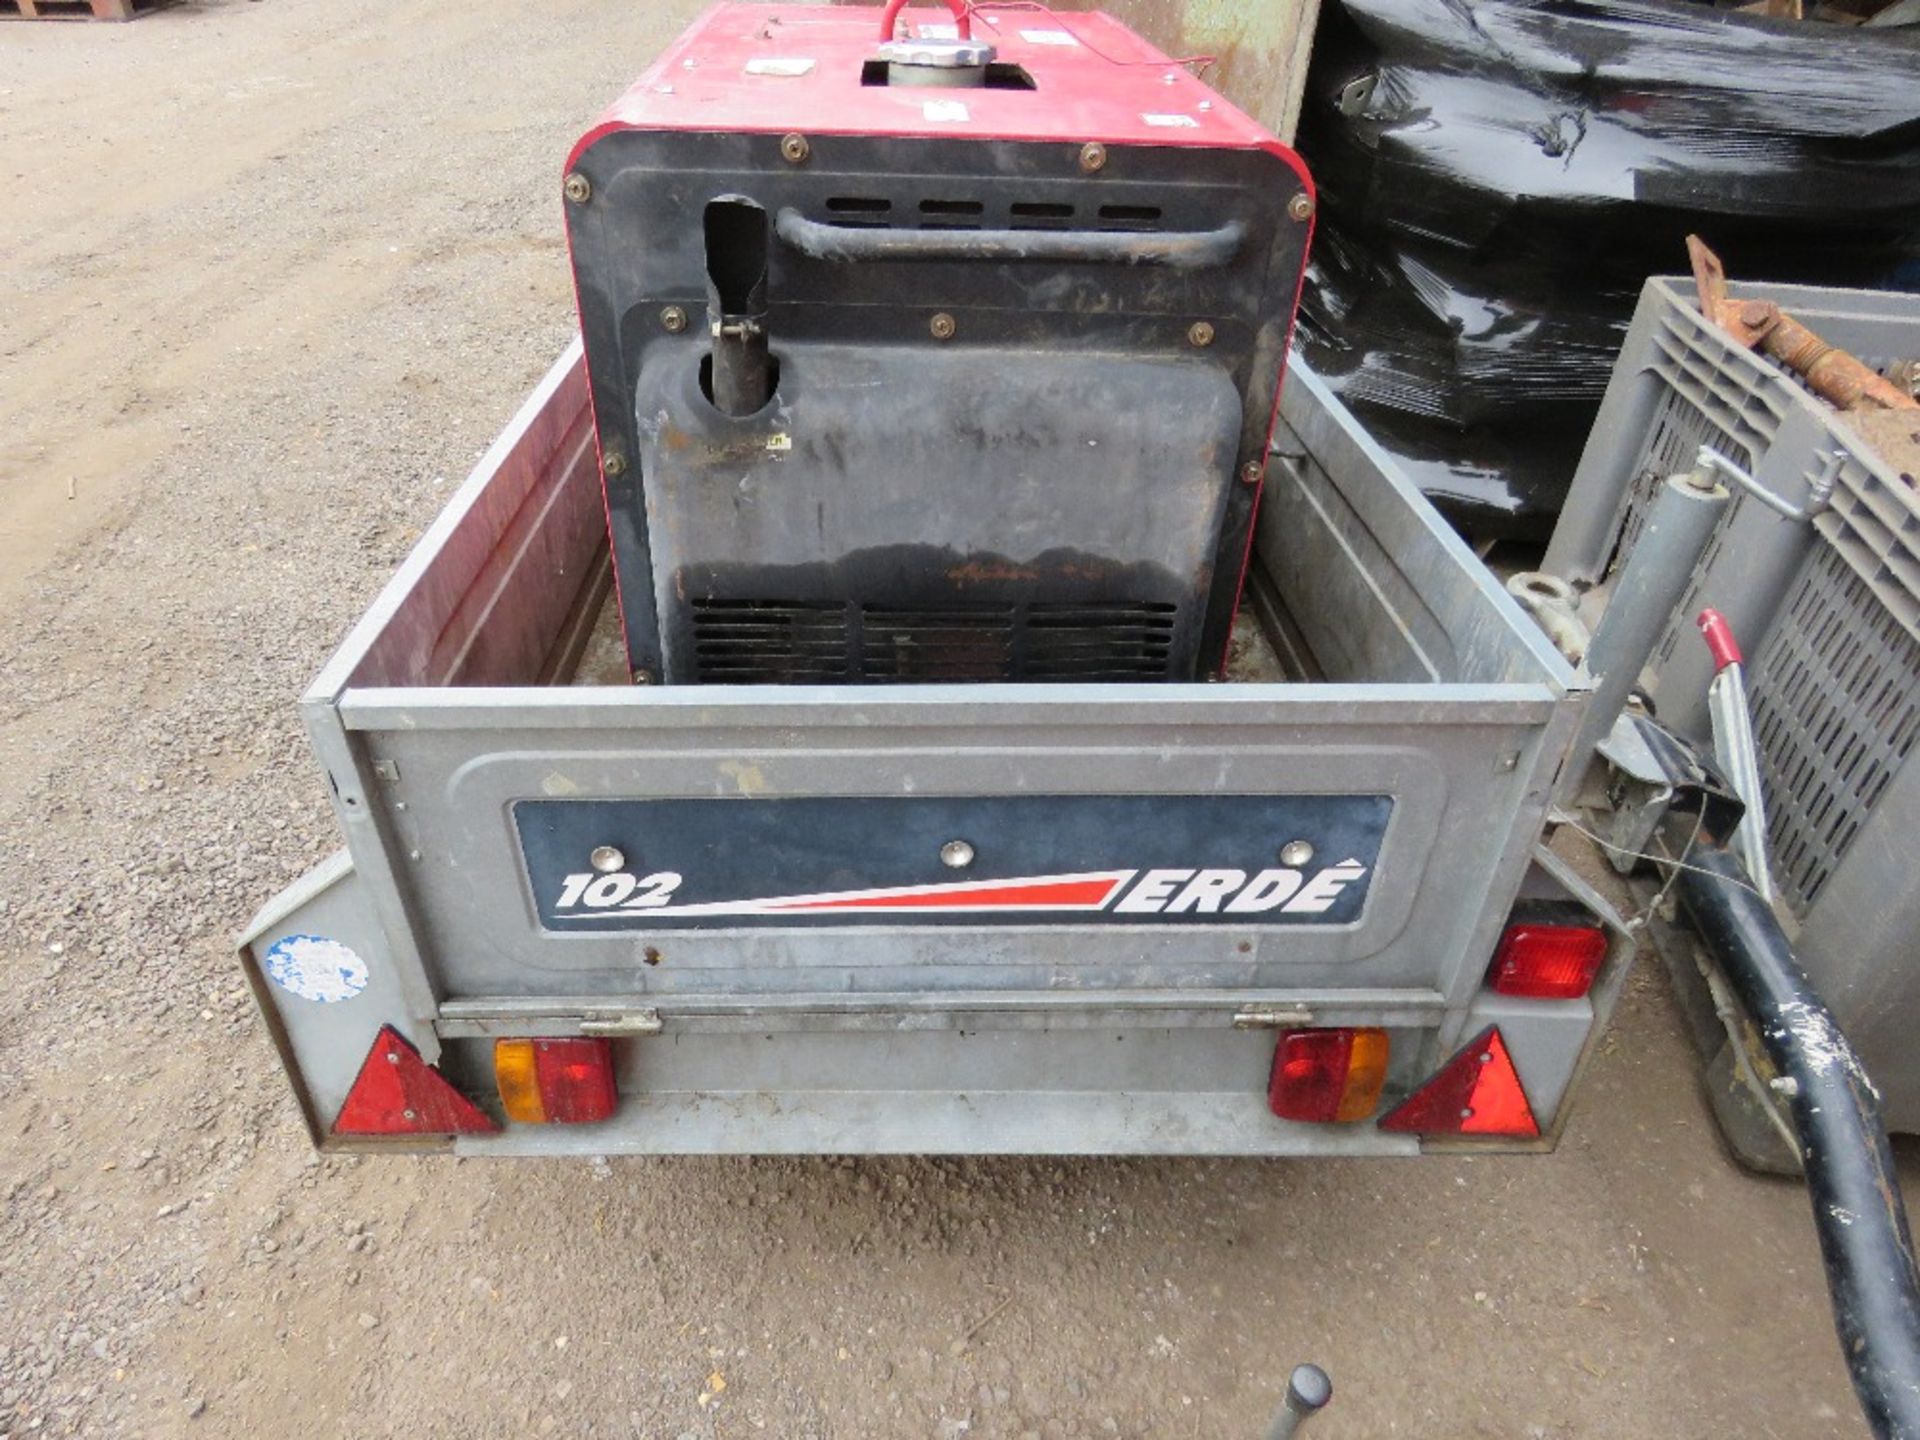 ERDE SMALL TRAILER WITH A DIESEL GENERATOR, 6KVA APPROX. - Image 2 of 4